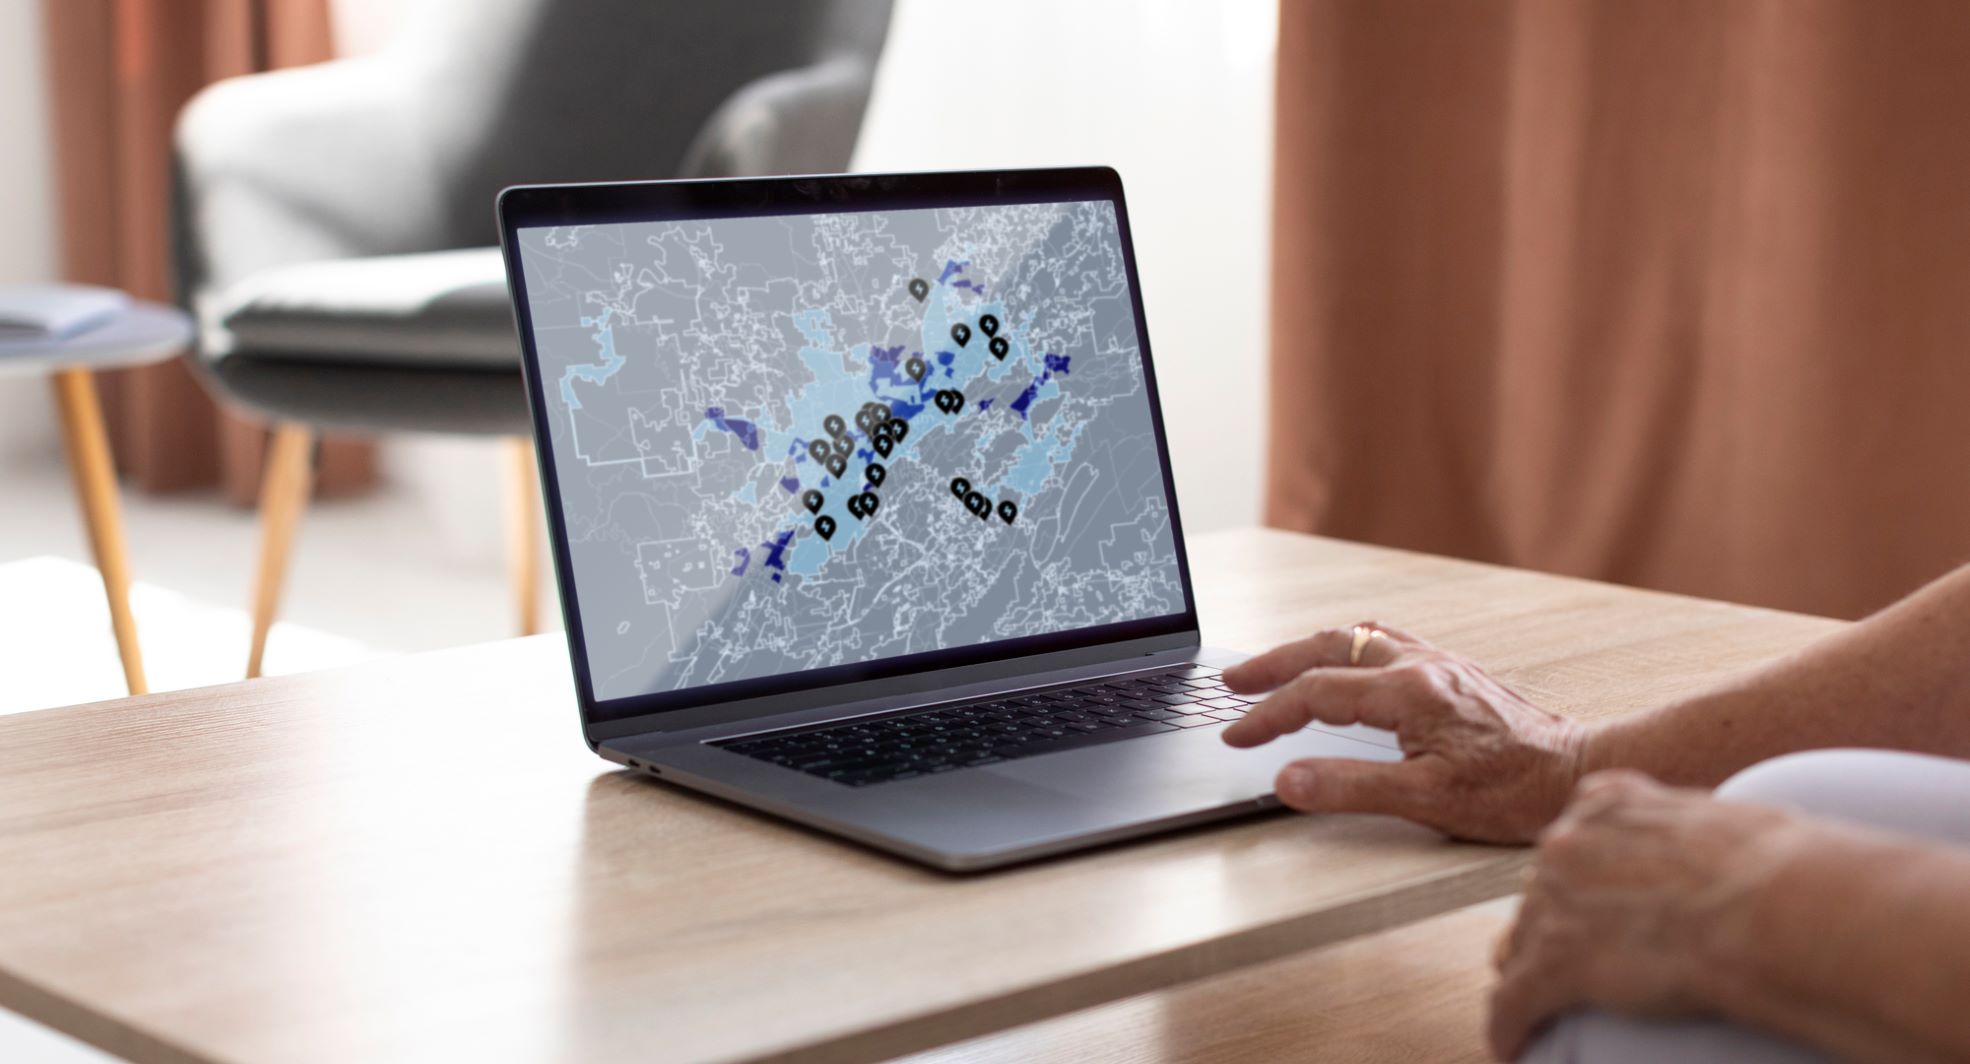 PredictEV now enables state and local governments to precisely identify optimal charger locations and charging speeds in disadvantaged communities